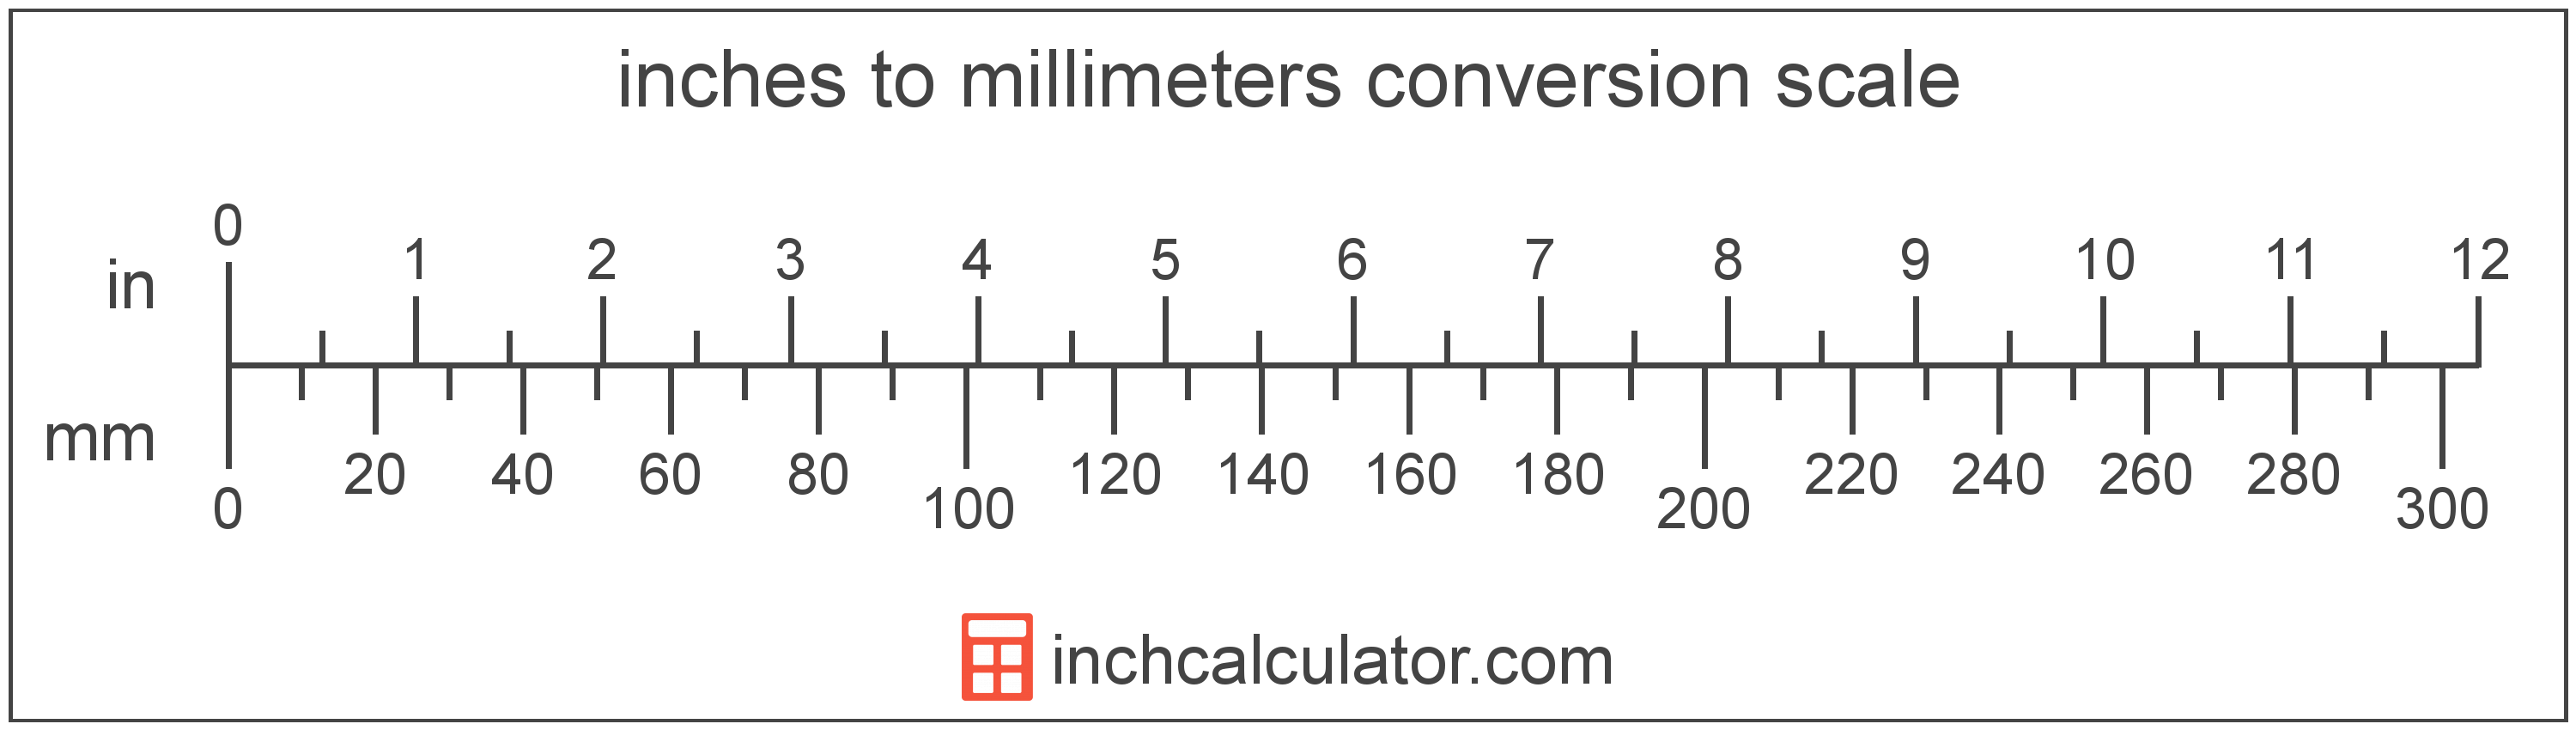 conversion scale showing millimeters and equivalent inches length values